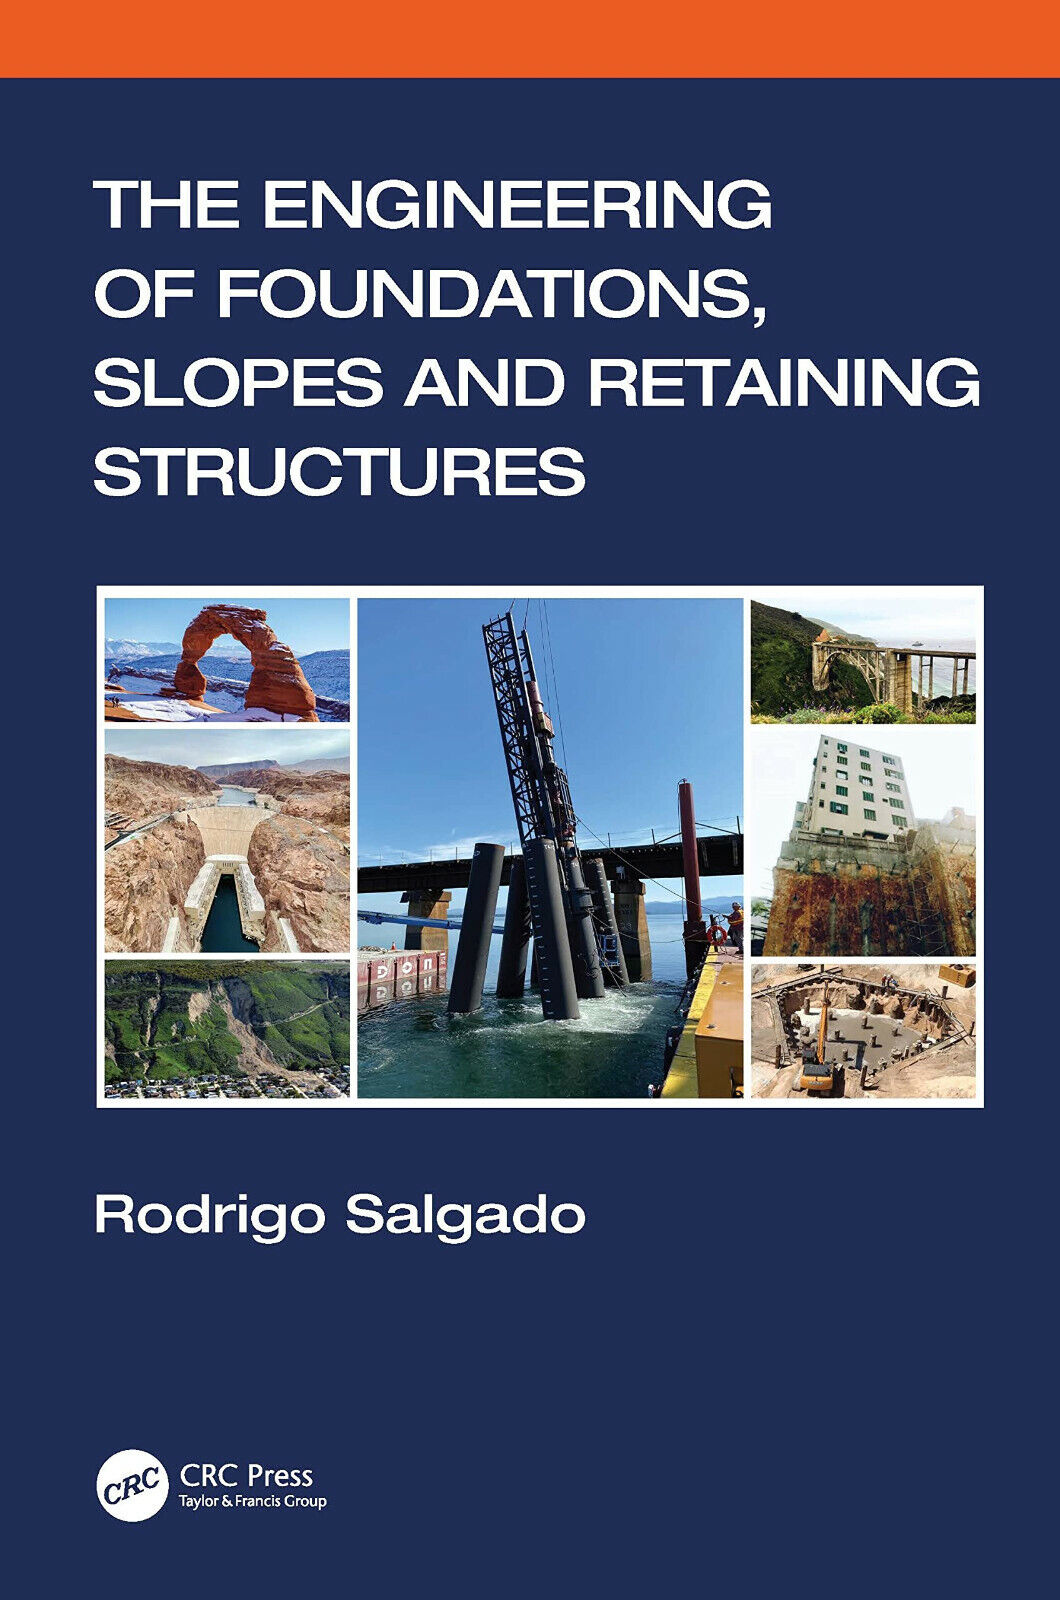 The Engineering of Foundations, Slopes and Retaining Structures - CRC Press,2022